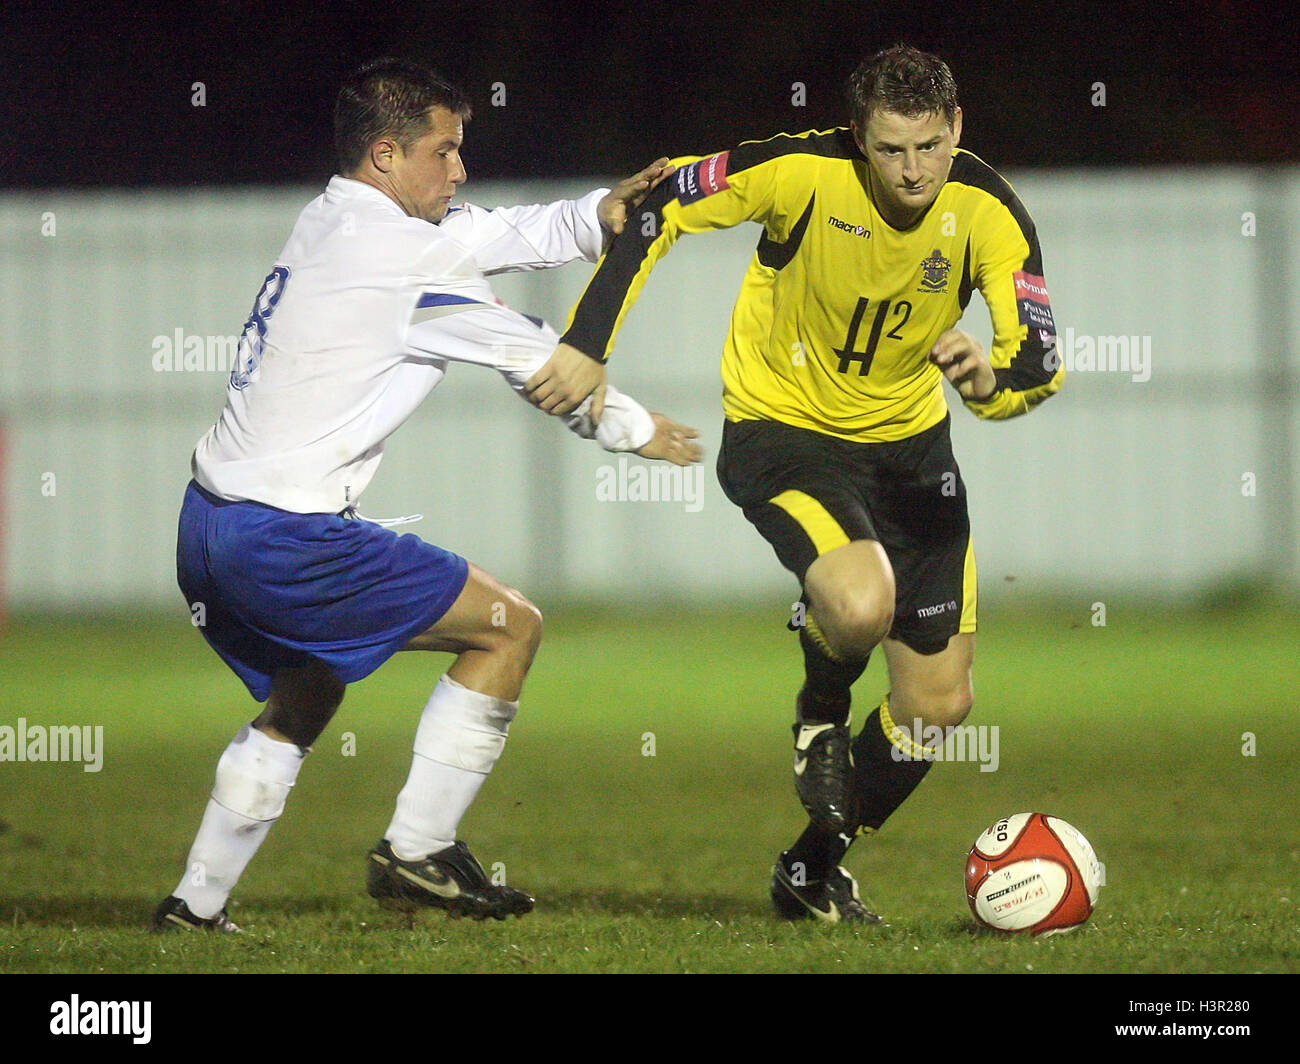 Bobby Port of Romford evades Rudi Hall - Enfield Town vs Romford - Ryman League Division One North at Brimsdown Rovers FC - 05/10/09 Stock Photo